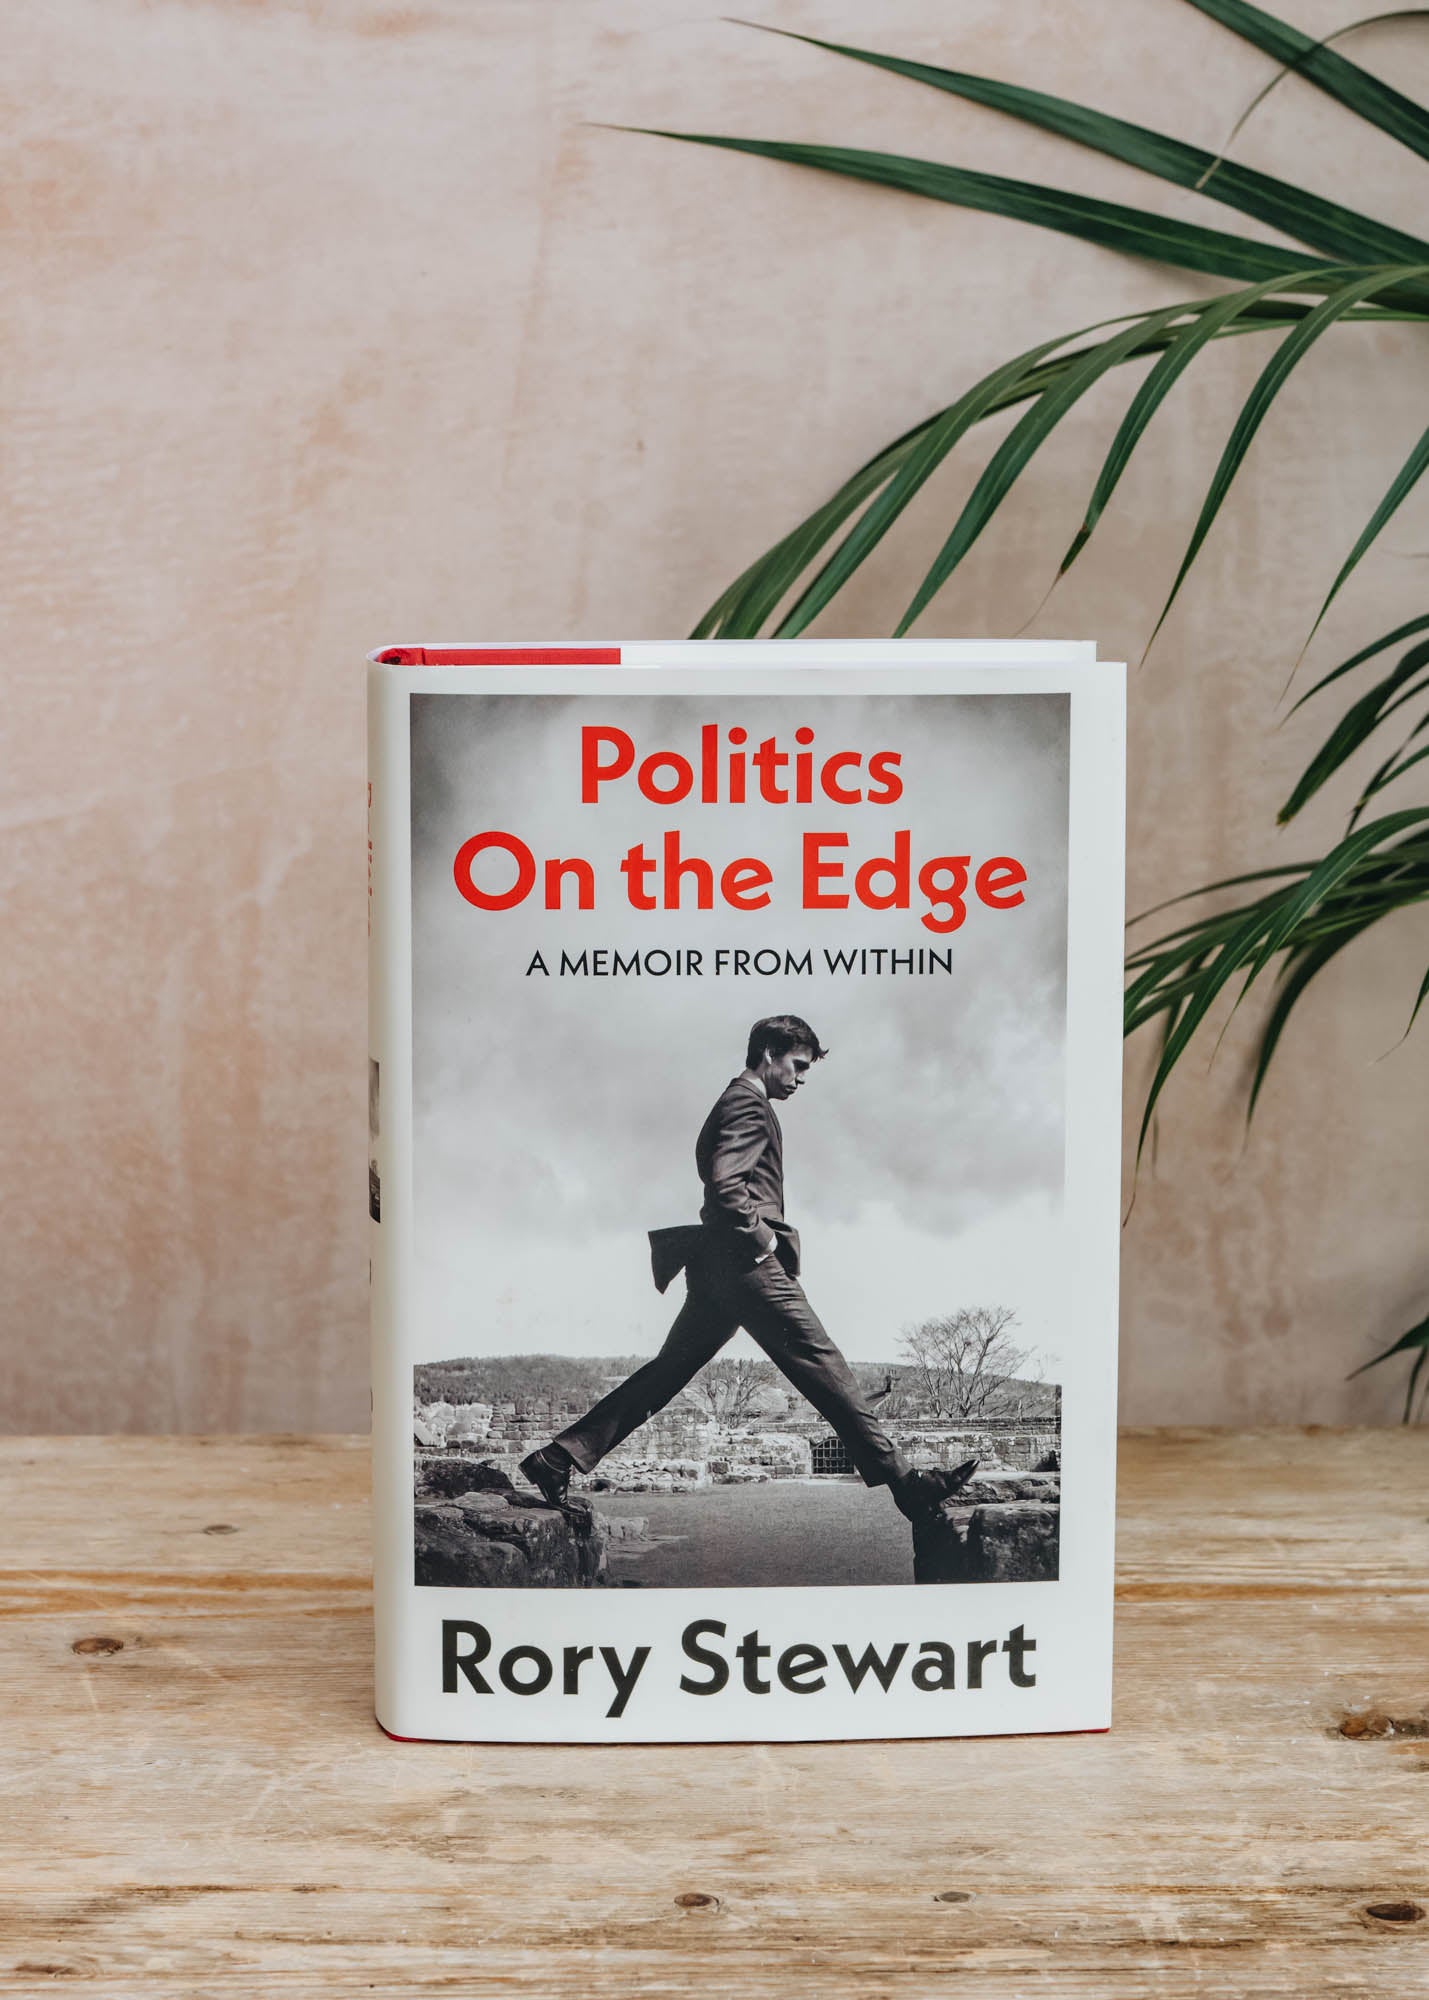 Politics on the Edge by Rory Stewart